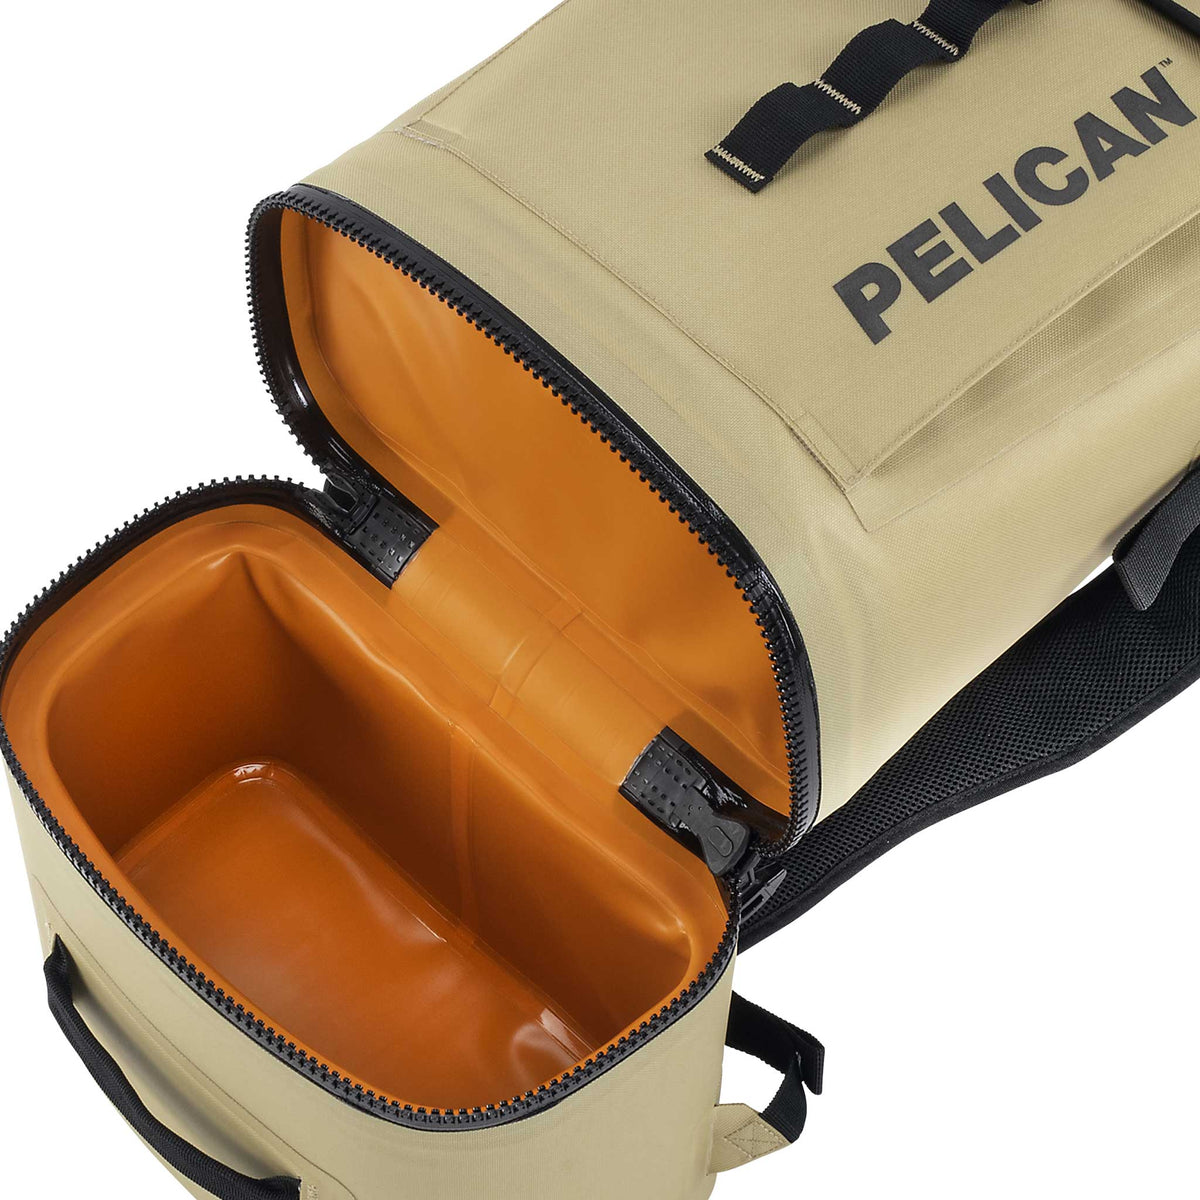 Pelican™ Dayventure Backpack Soft Cooler in tan with cooler compartment opened